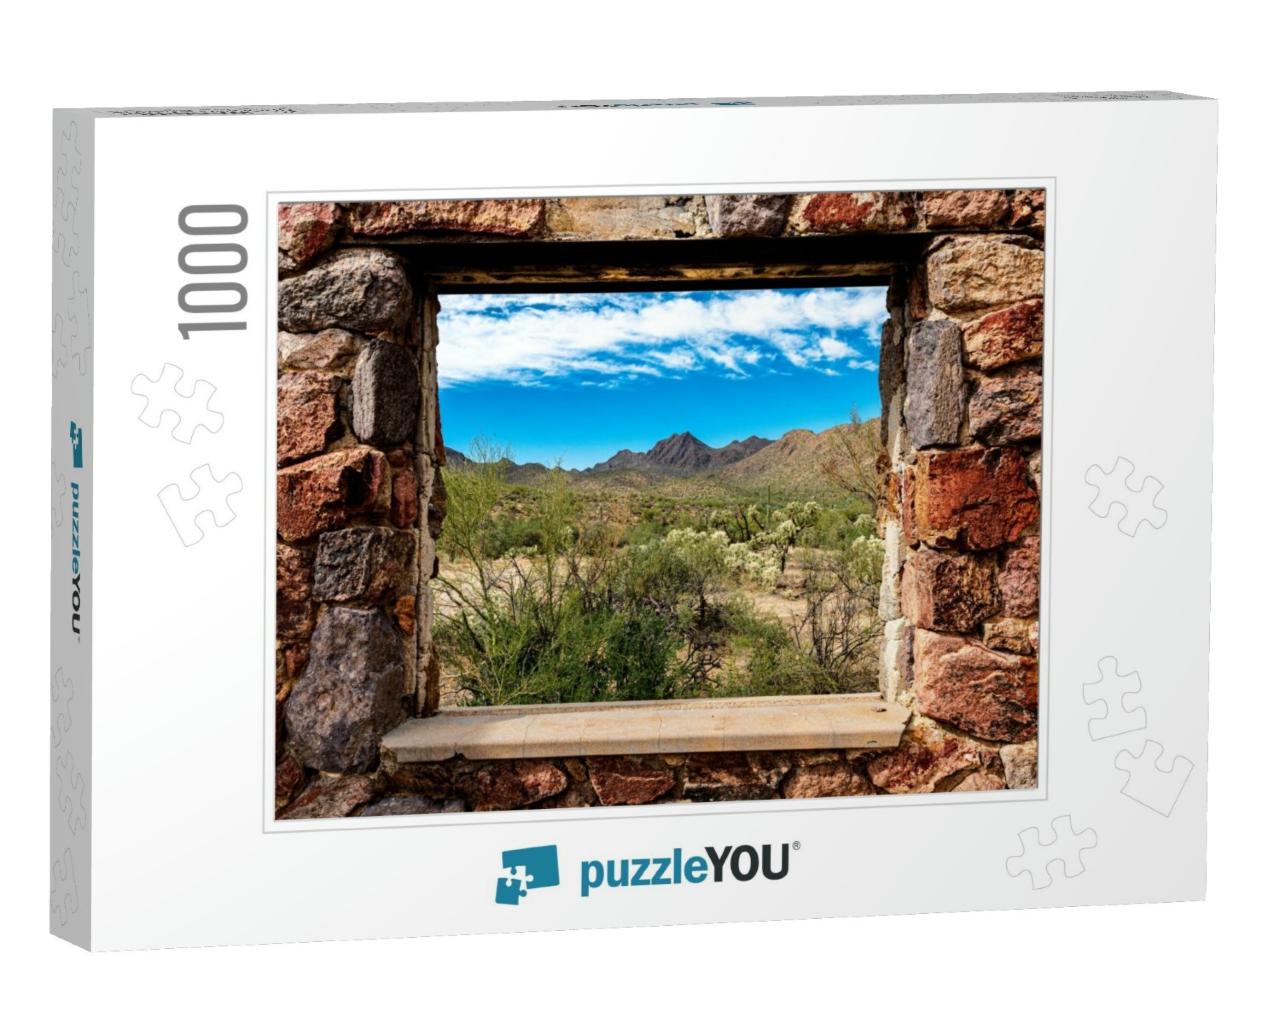 Looking Through the Window At the Picturesque Desert Land... Jigsaw Puzzle with 1000 pieces